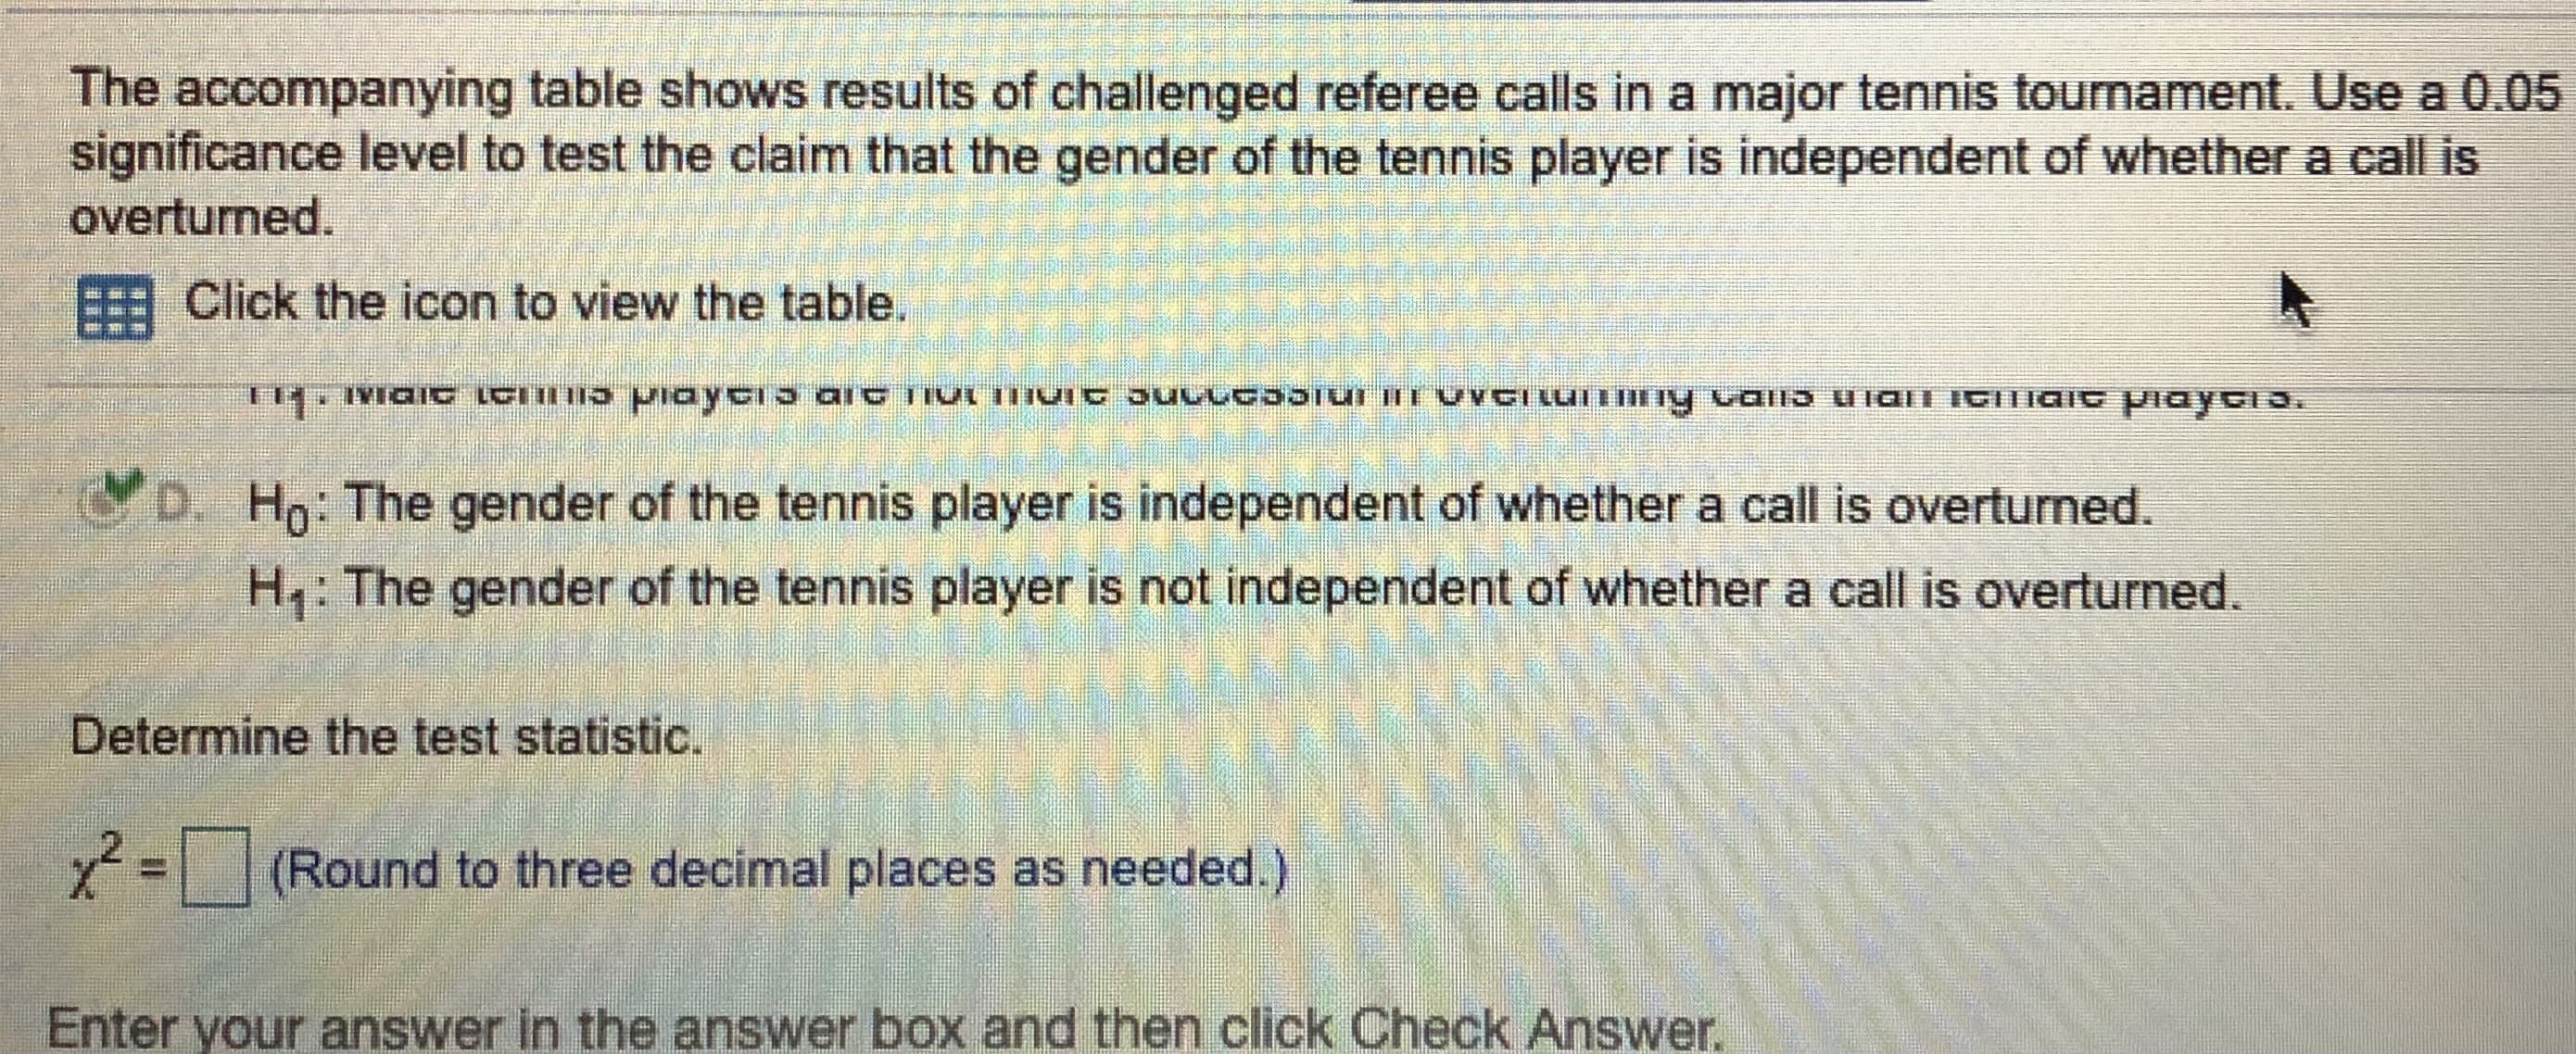 The accompanying table shows results of challenged referee calls in a major tennis tournament. Use a 0.05
significance level to test the claim that the gender of the tennis player is independent of whether a call is
overturned.
